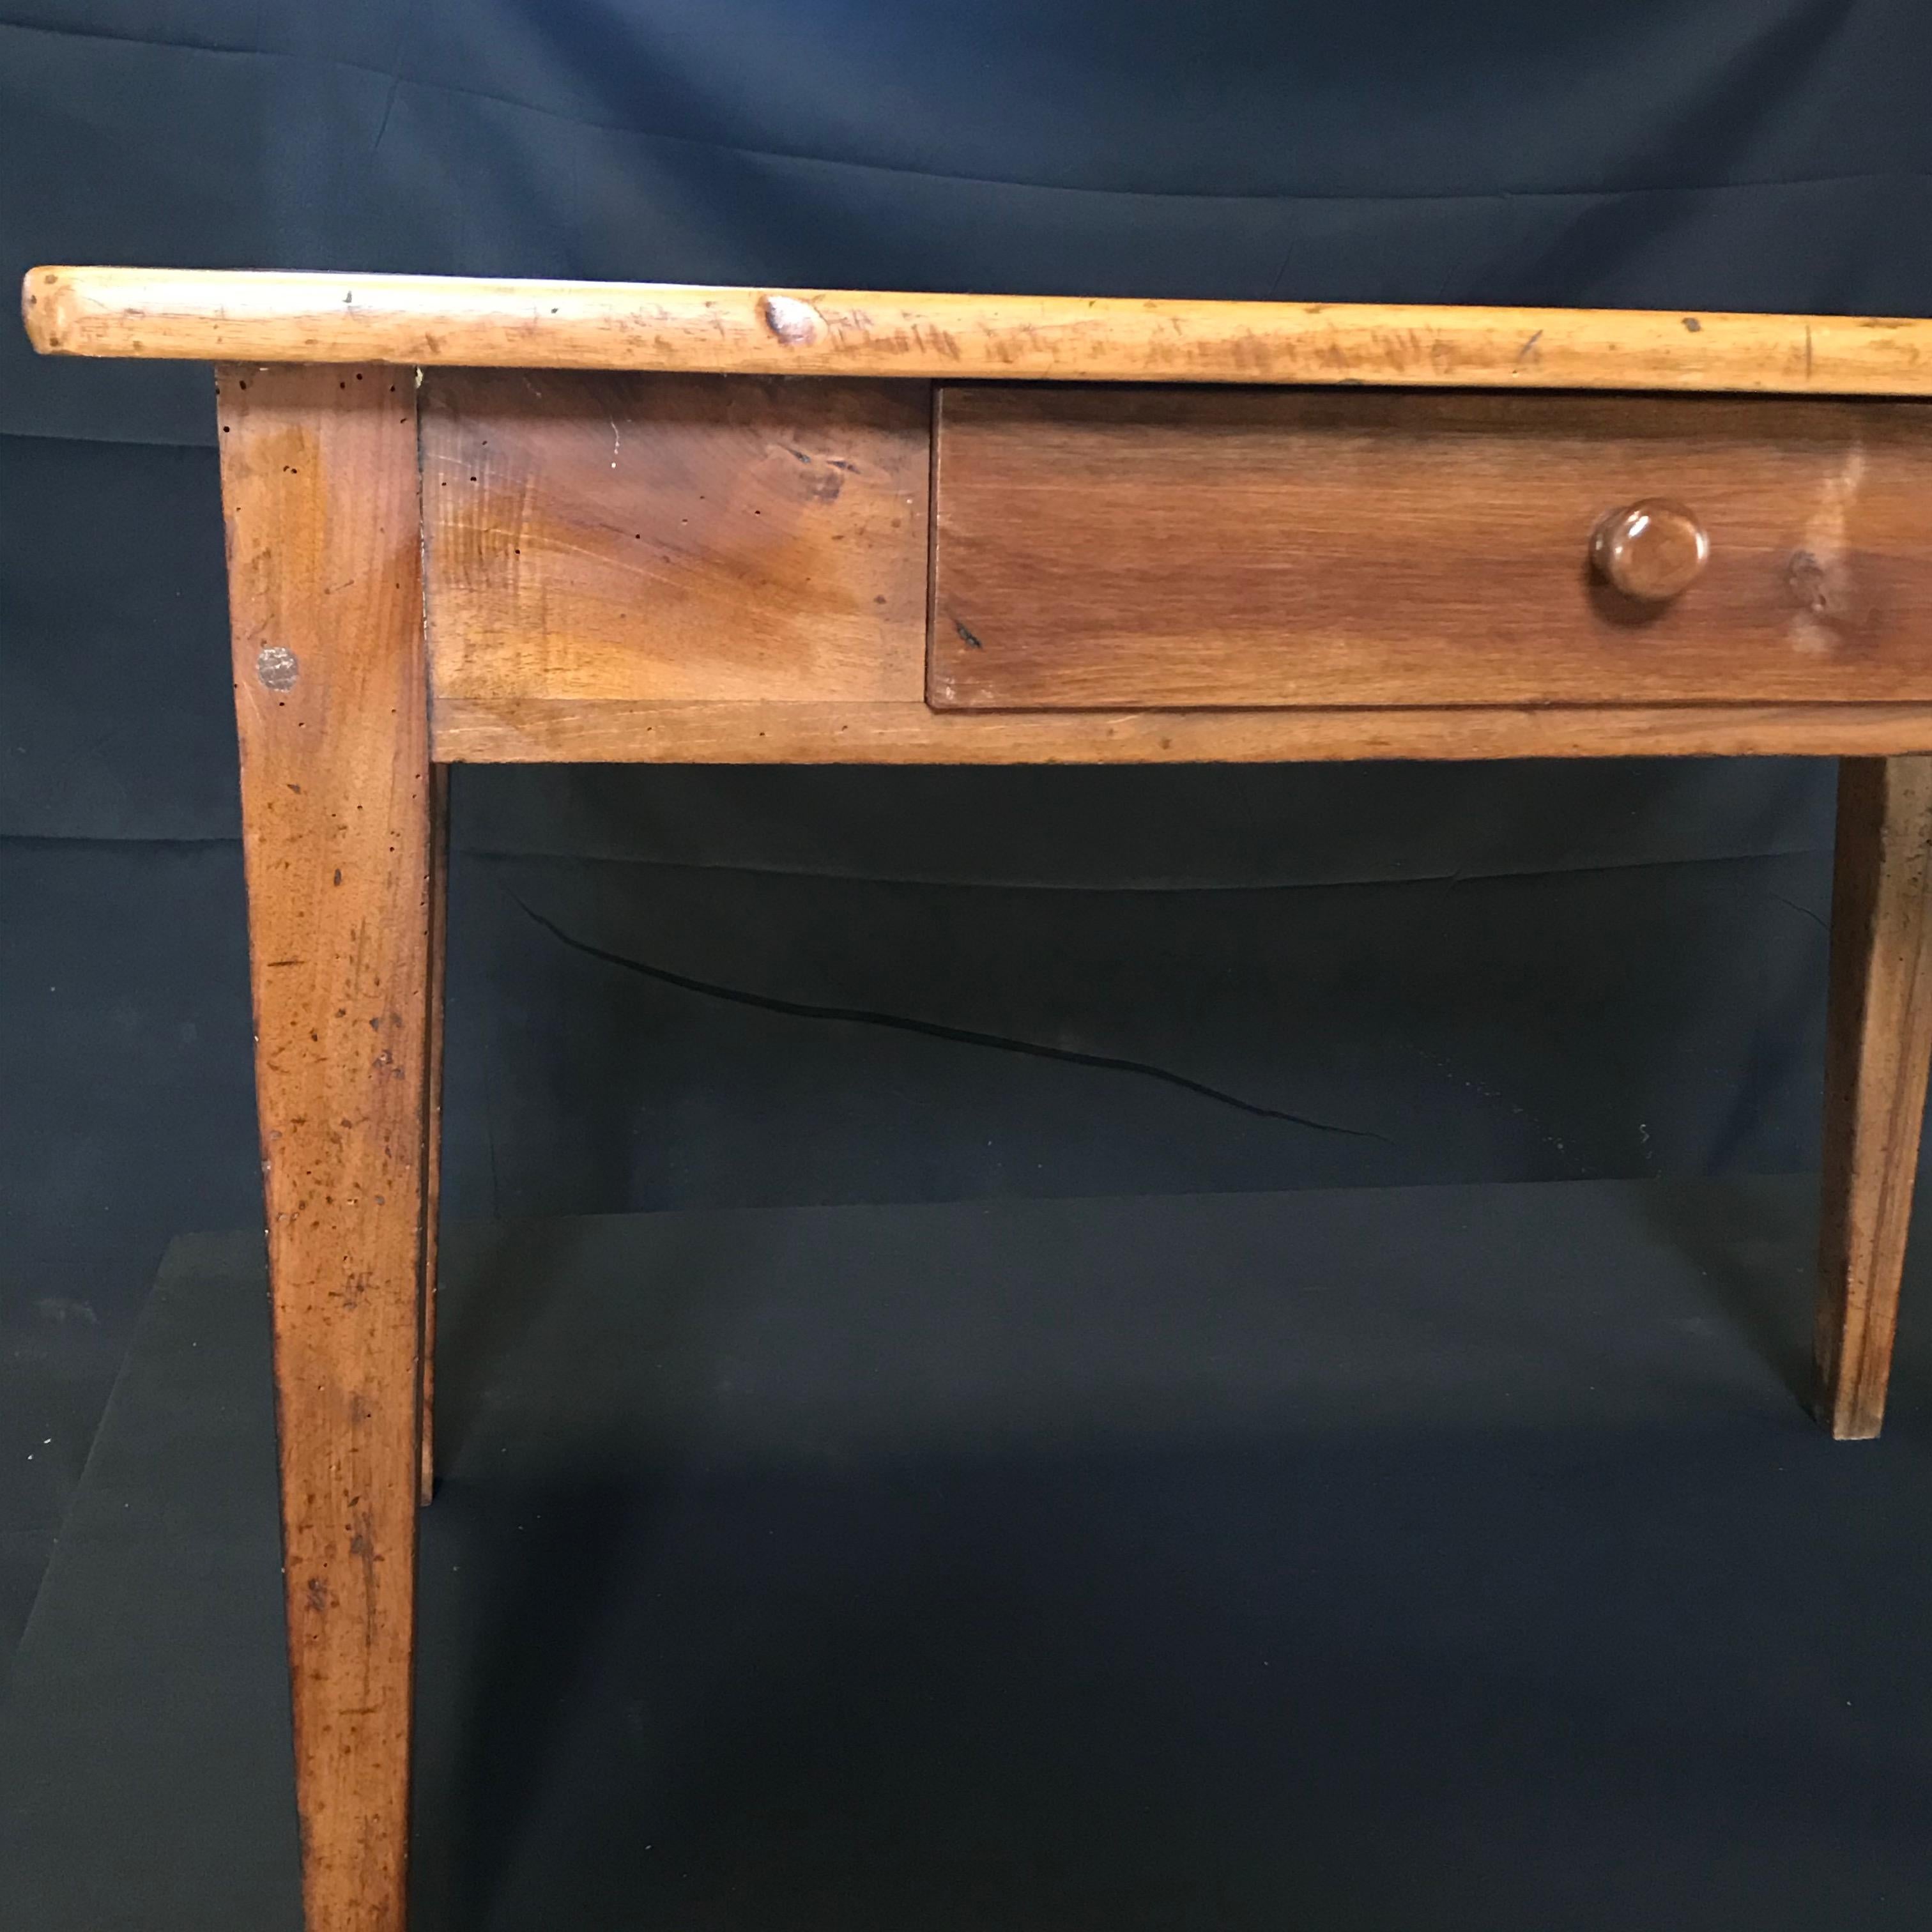 Beautiful country French table that is versatile: can be a side table or desk. Simple, classic Provence style with single drawer and simple tapered legs. Apron 22.5 h
#4391

